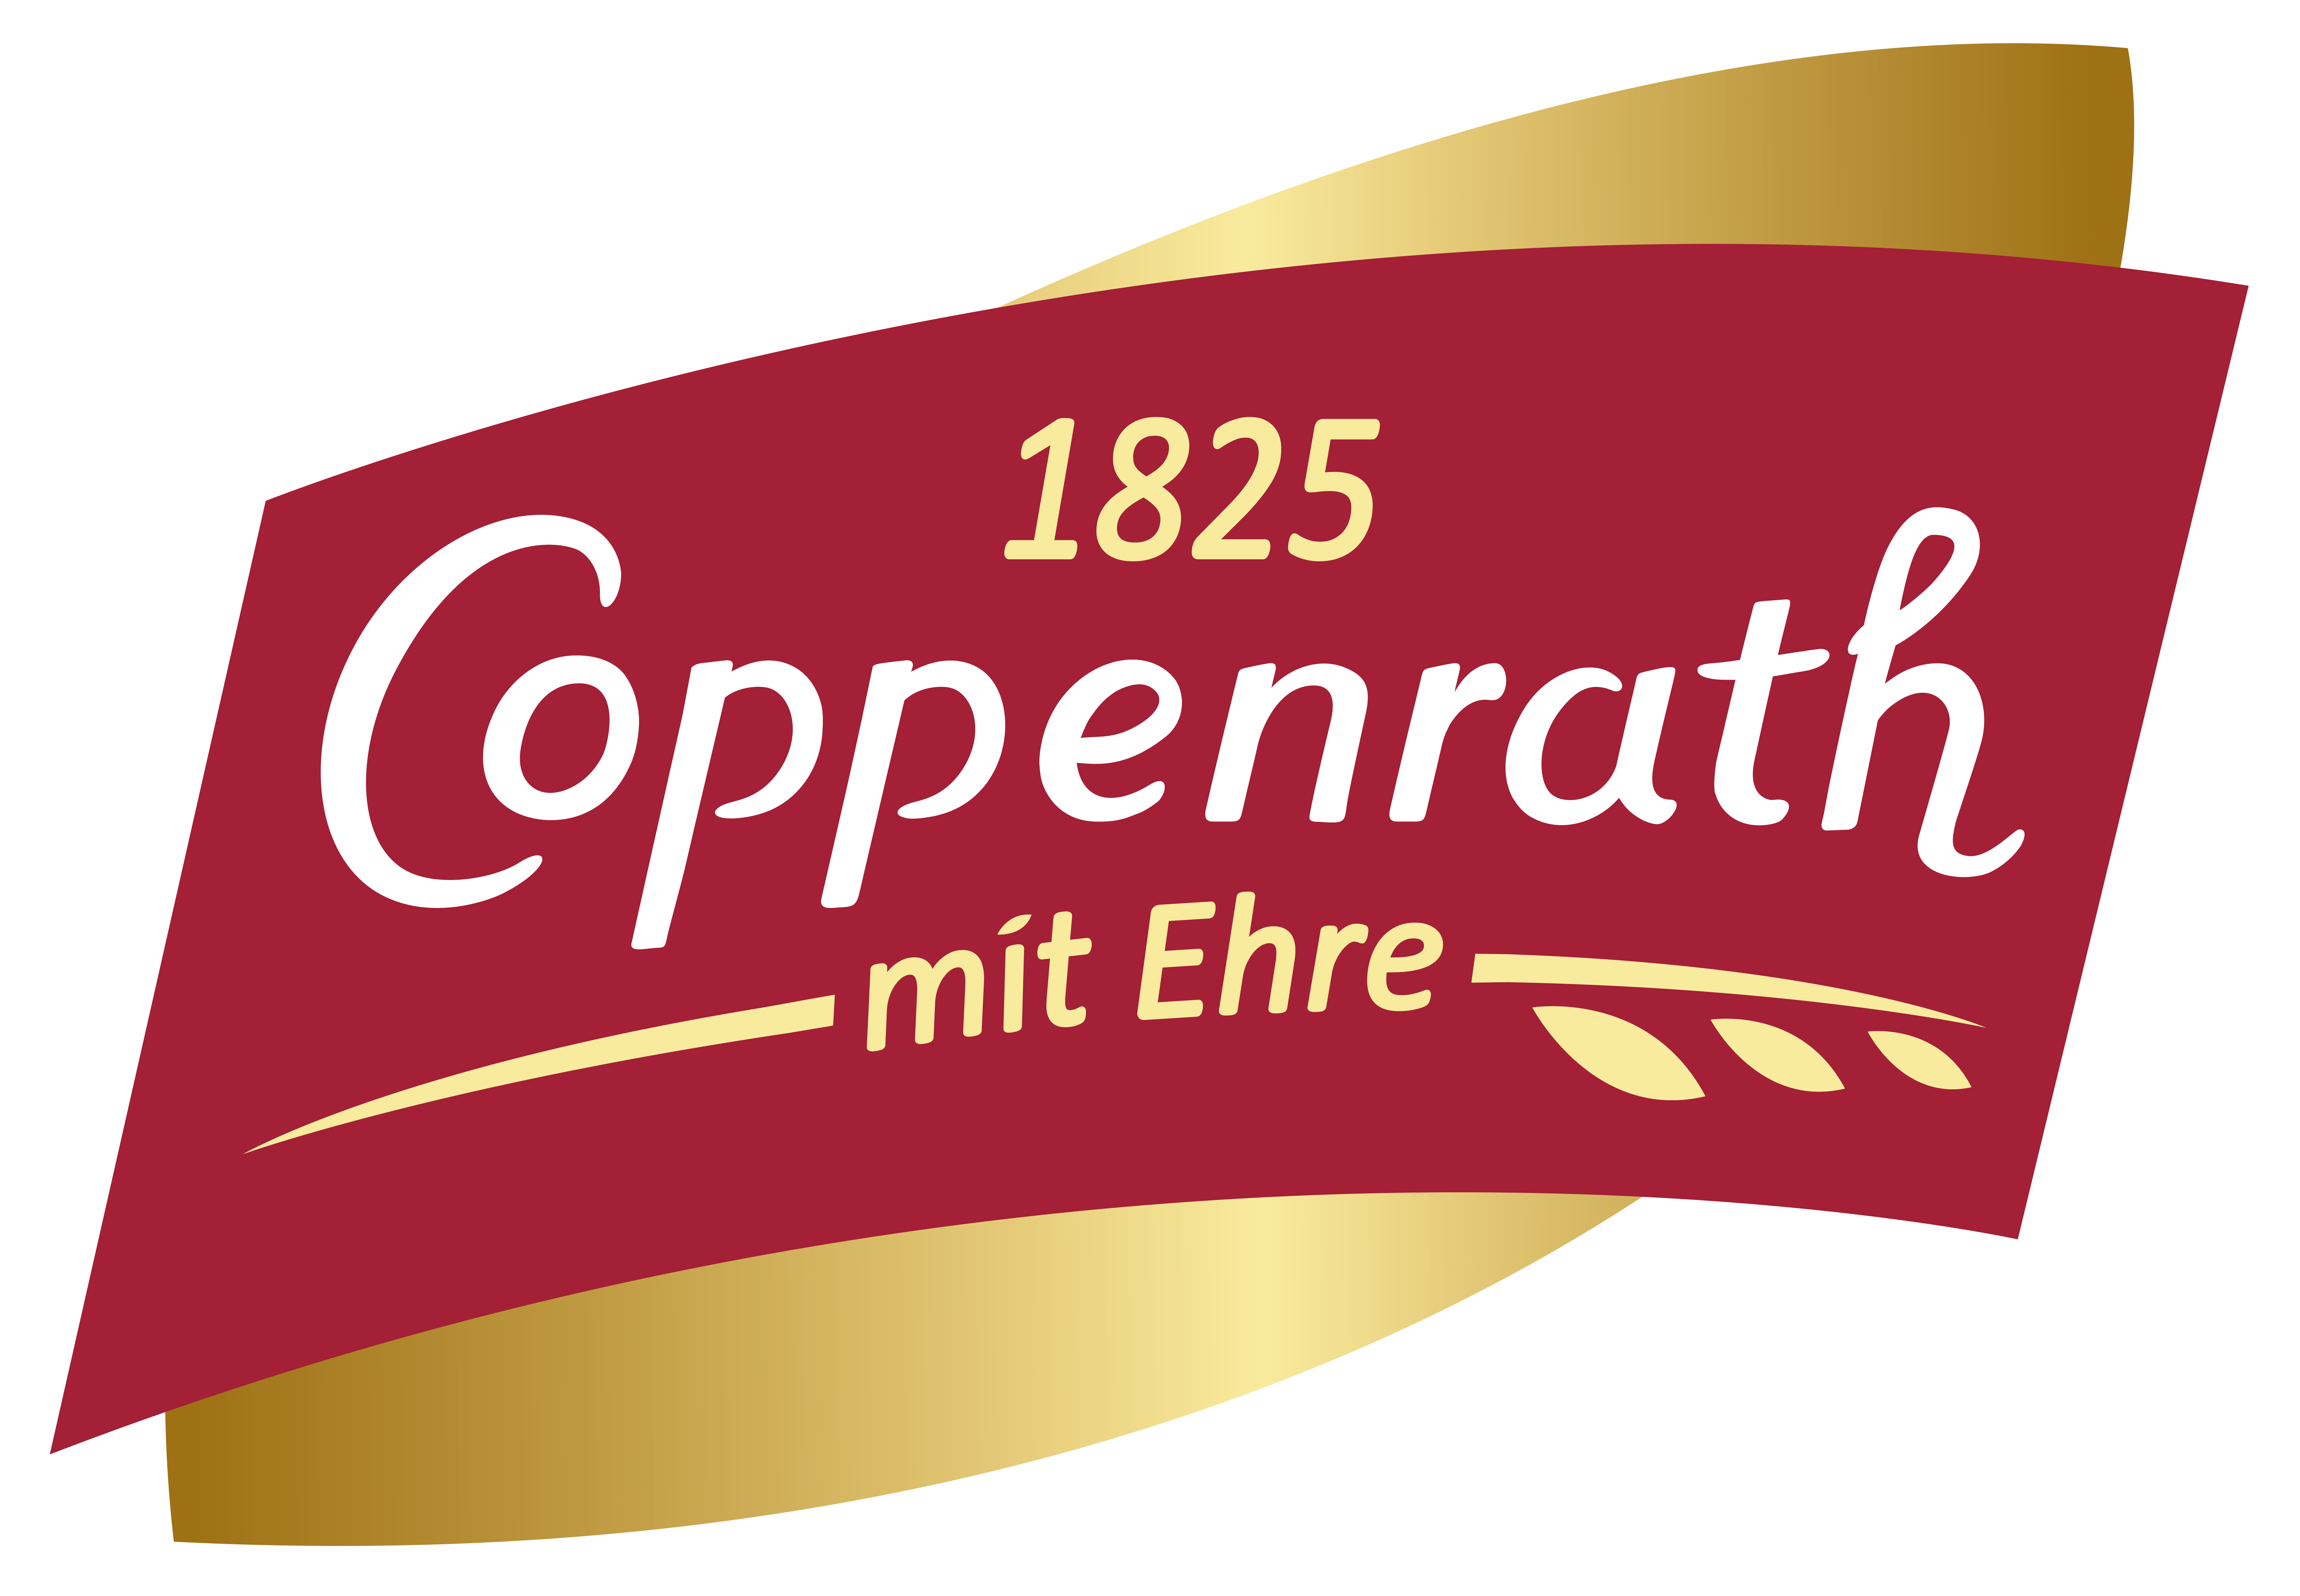 Daily updated SAP data at Coppenrath